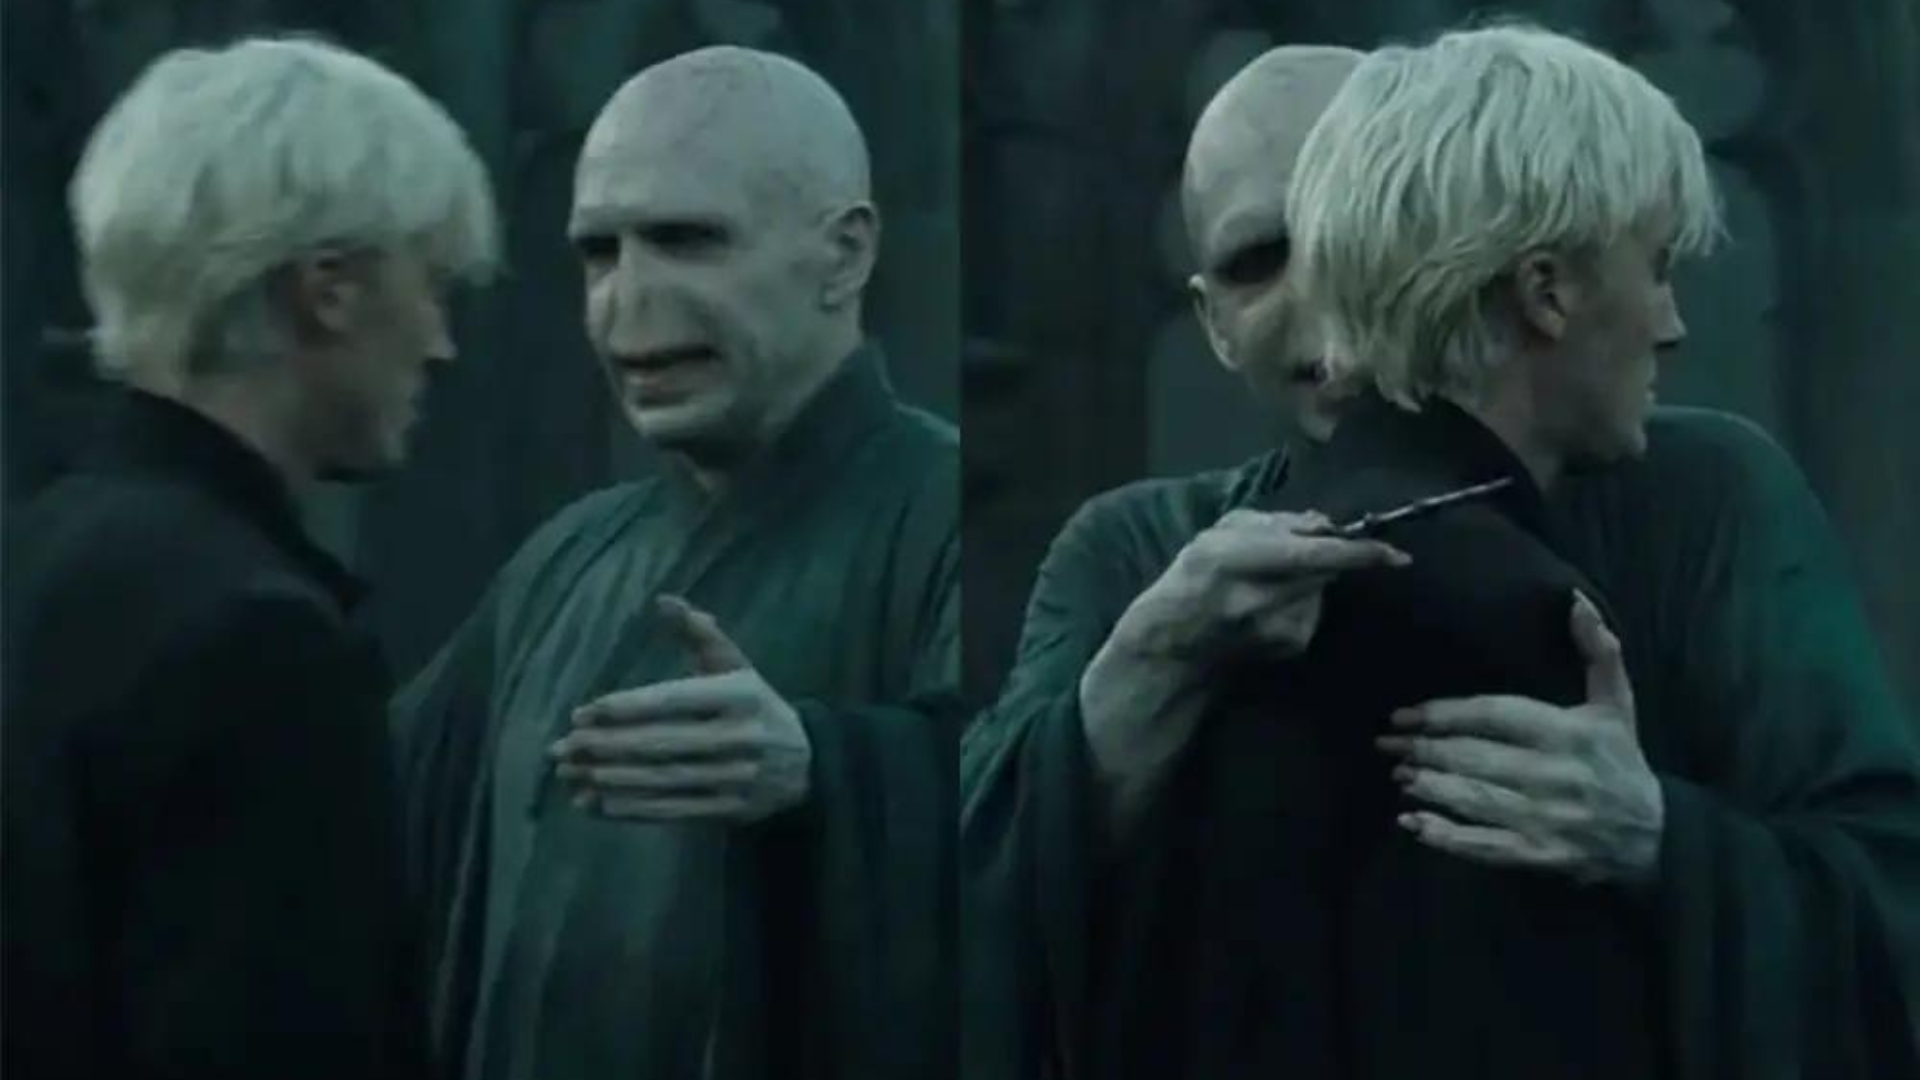 Harry Potter 8 Draco and Voldemort // Source: WB